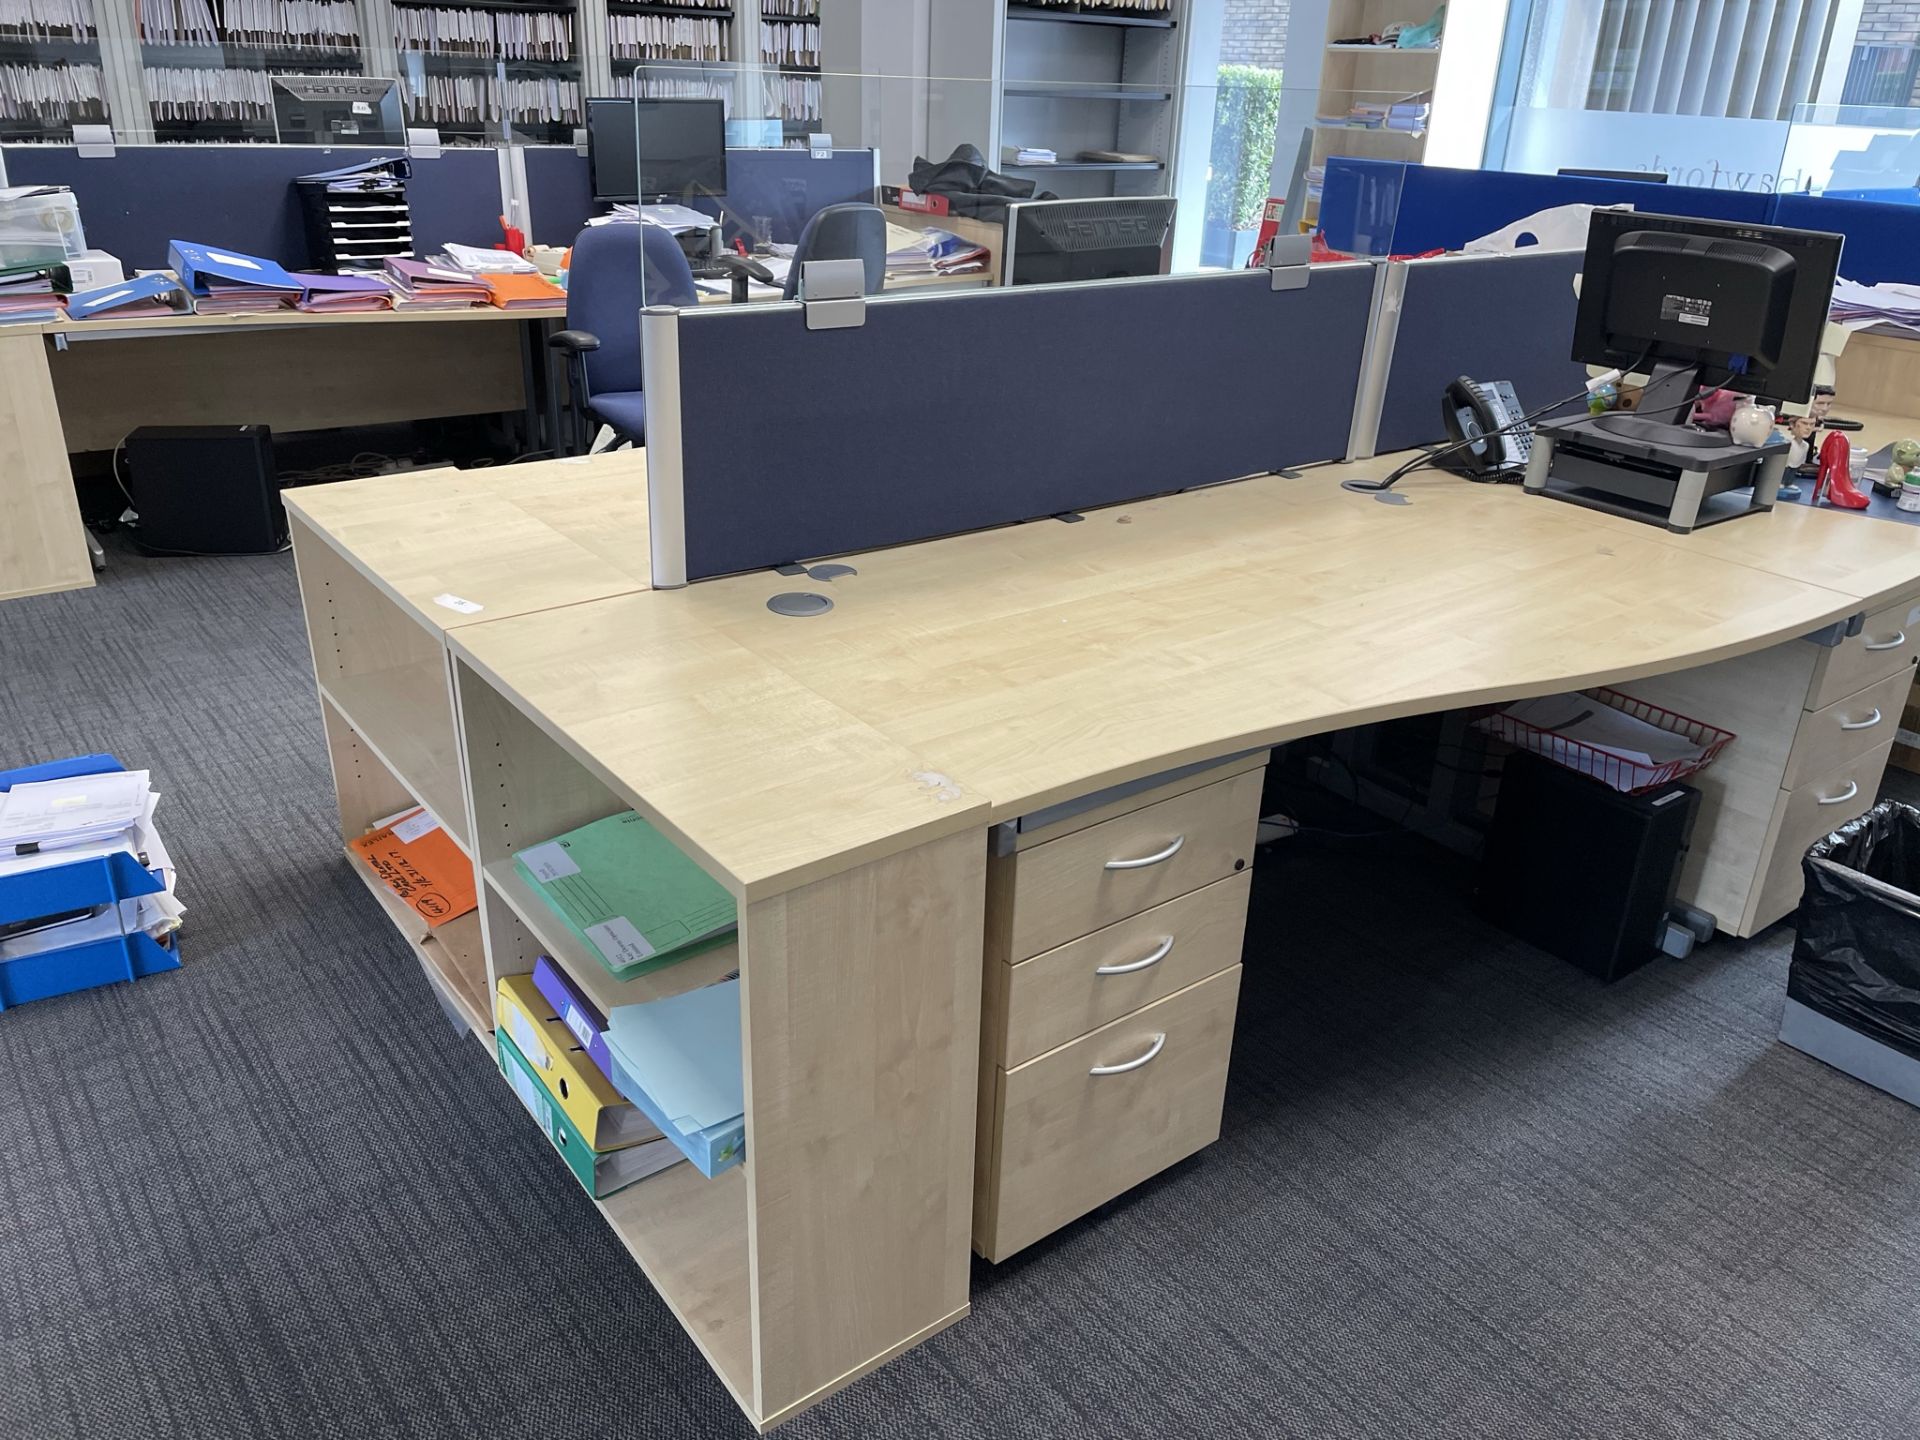 2 x (R & L) Workdesks w/ Light Wood Effect, Cloth Partitions | 160 x 100cm - Image 4 of 4